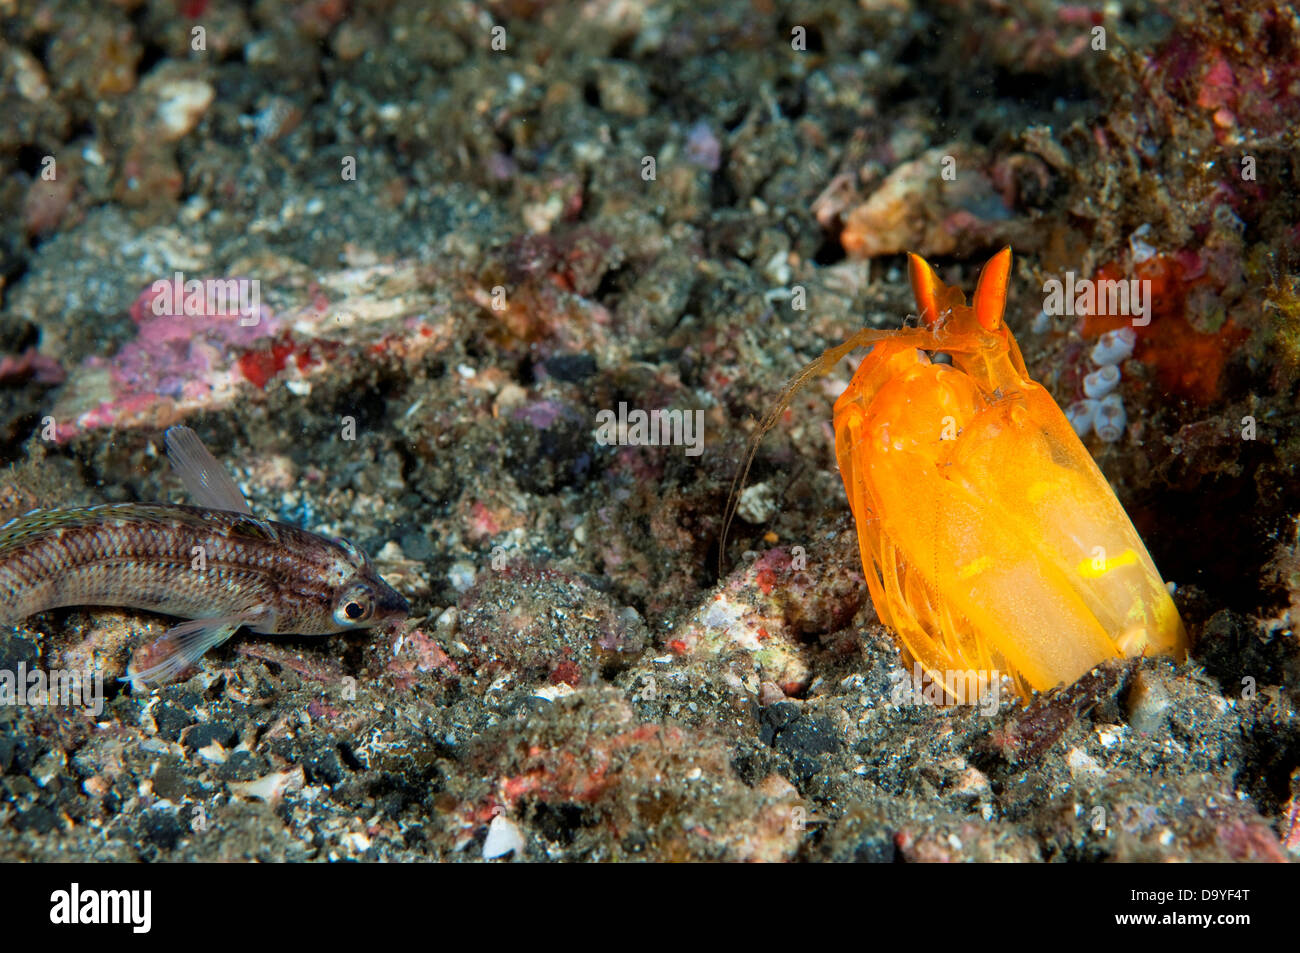 Spearing Mantis Shrimp, Lysiosquilloides Sp., Coming out of burrow hunting fish, Lembeh Strait, Sulawesi, Indonesia Stock Photo